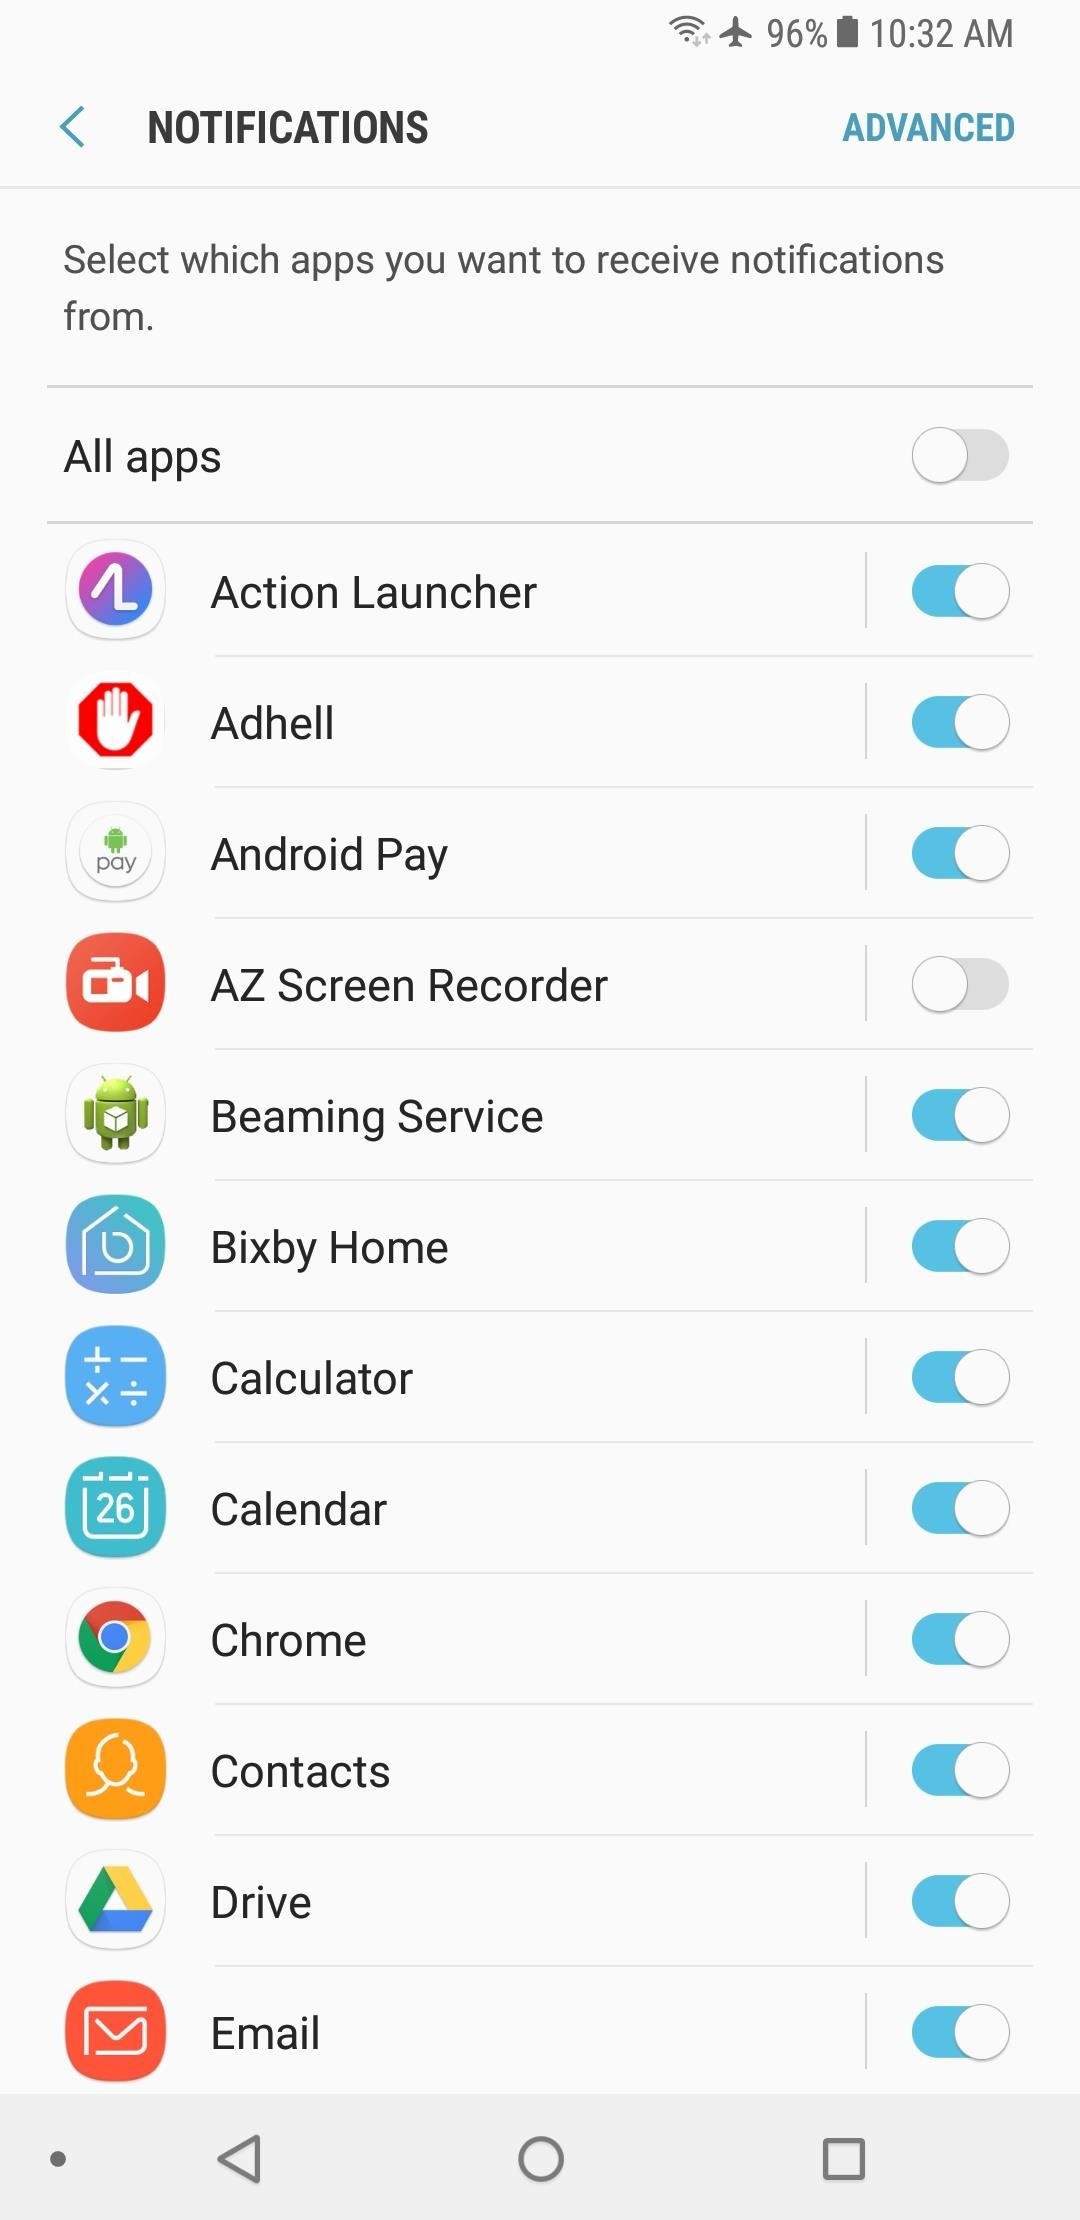 Everything You Need to Disable on Your Galaxy S8 or S8+ for Privacy & Security